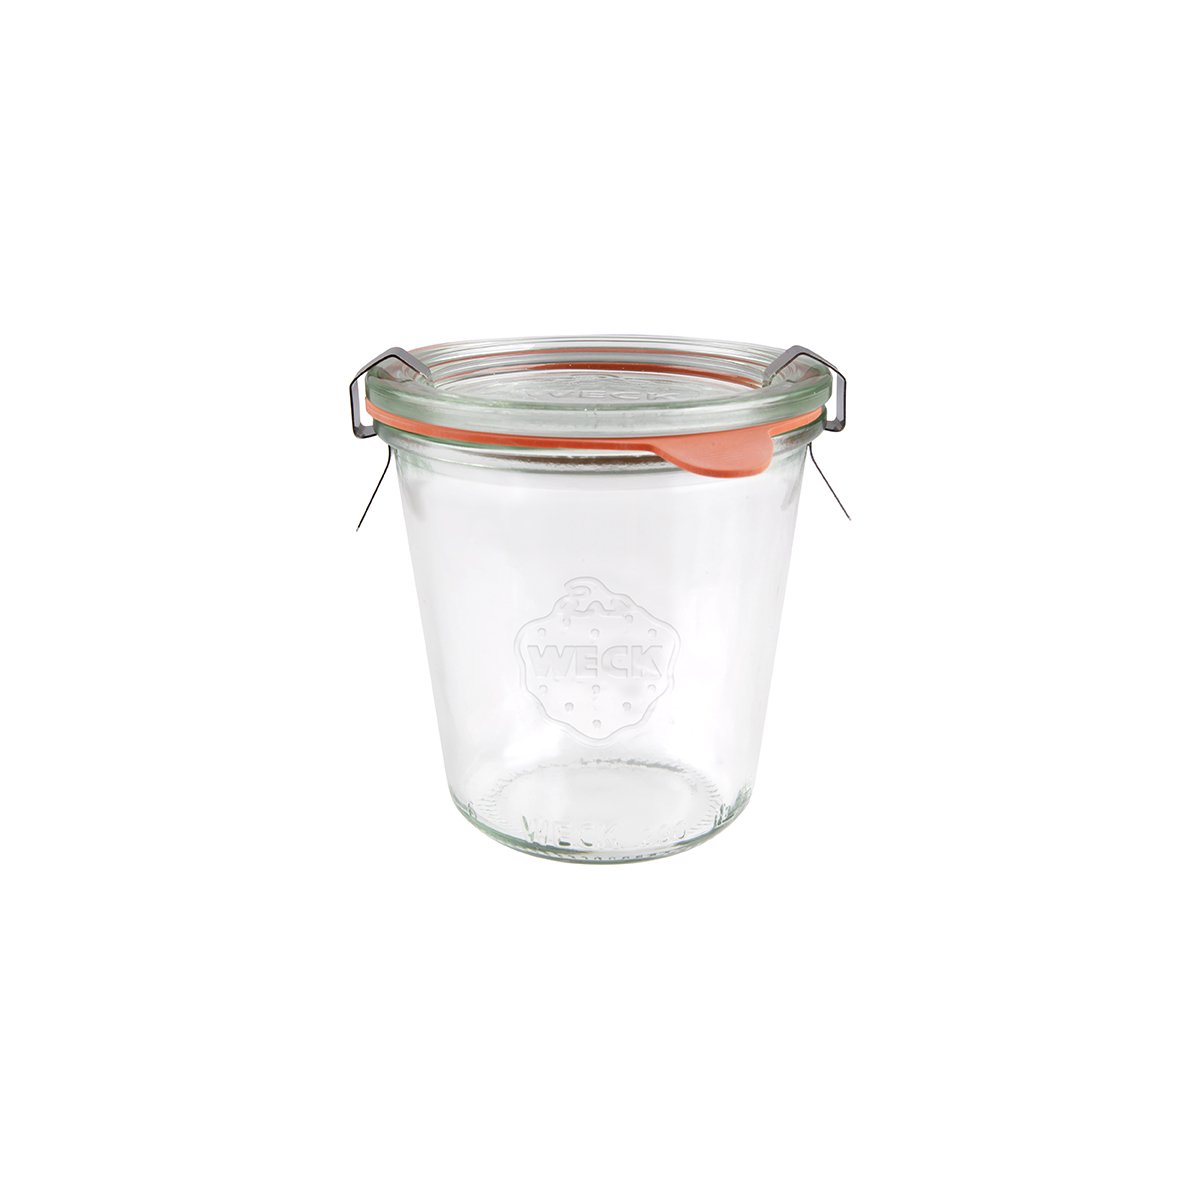 9982374 Weck Complete Glass Jar with Lid & Seal 80x87mm / 290ml Tomkin Australia Hospitality Supplies